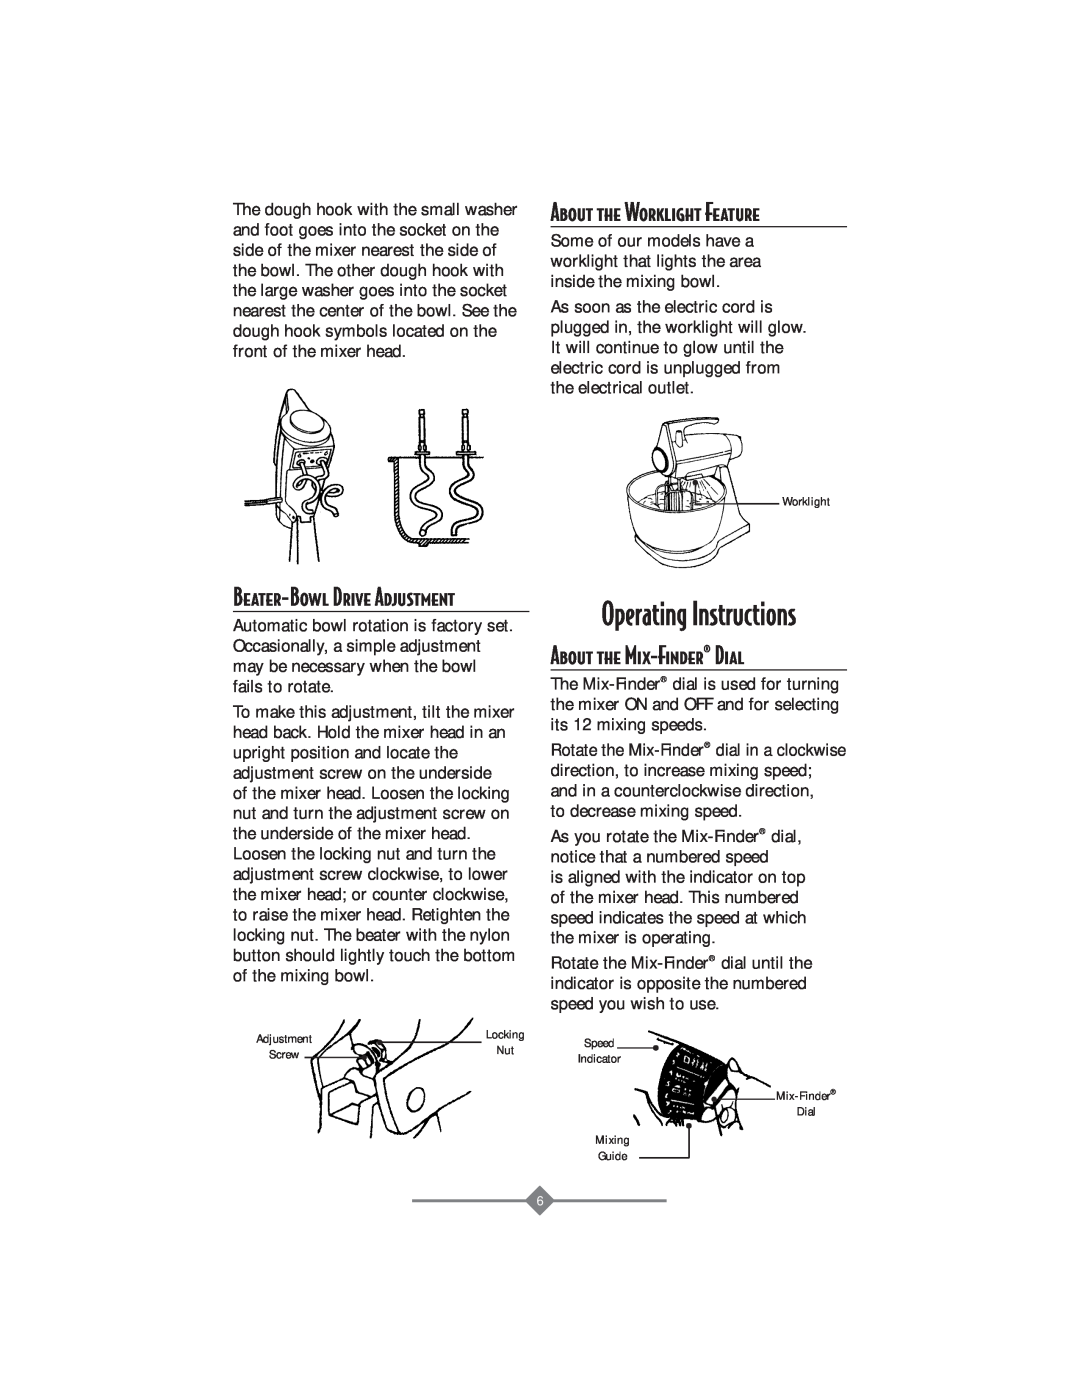 Sunbeam 2359 Operating Instructions, About the Worklight Feature, About the Mix-Finder¨ Dial, Beater-Bowl Drive Adjustment 